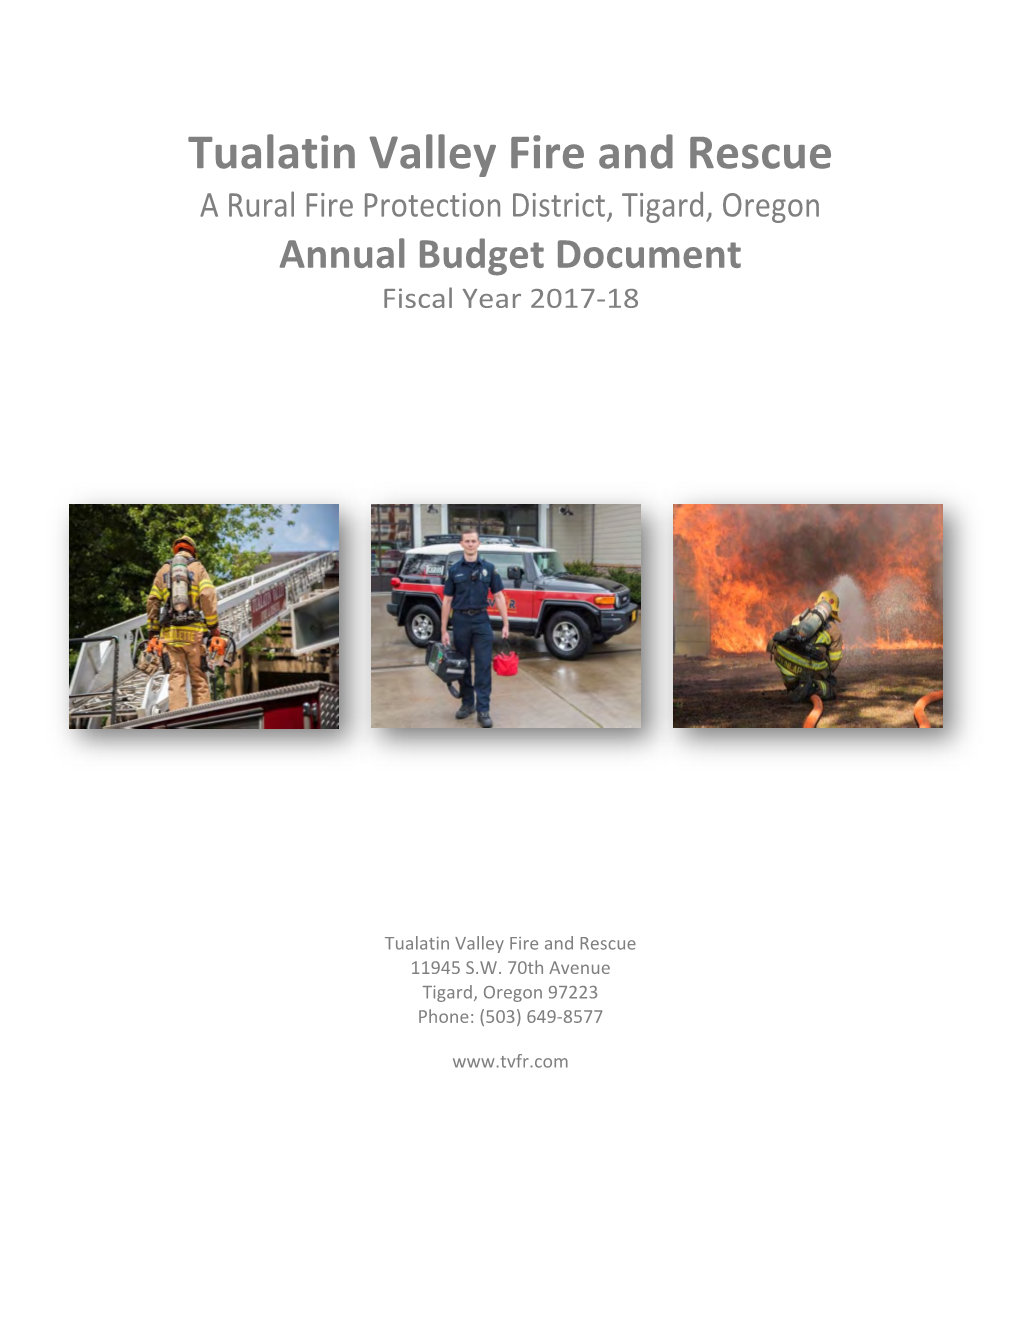 Tualatin Valley Fire and Rescue a Rural Fire Protection District, Tigard, Oregon Annual Budget Document